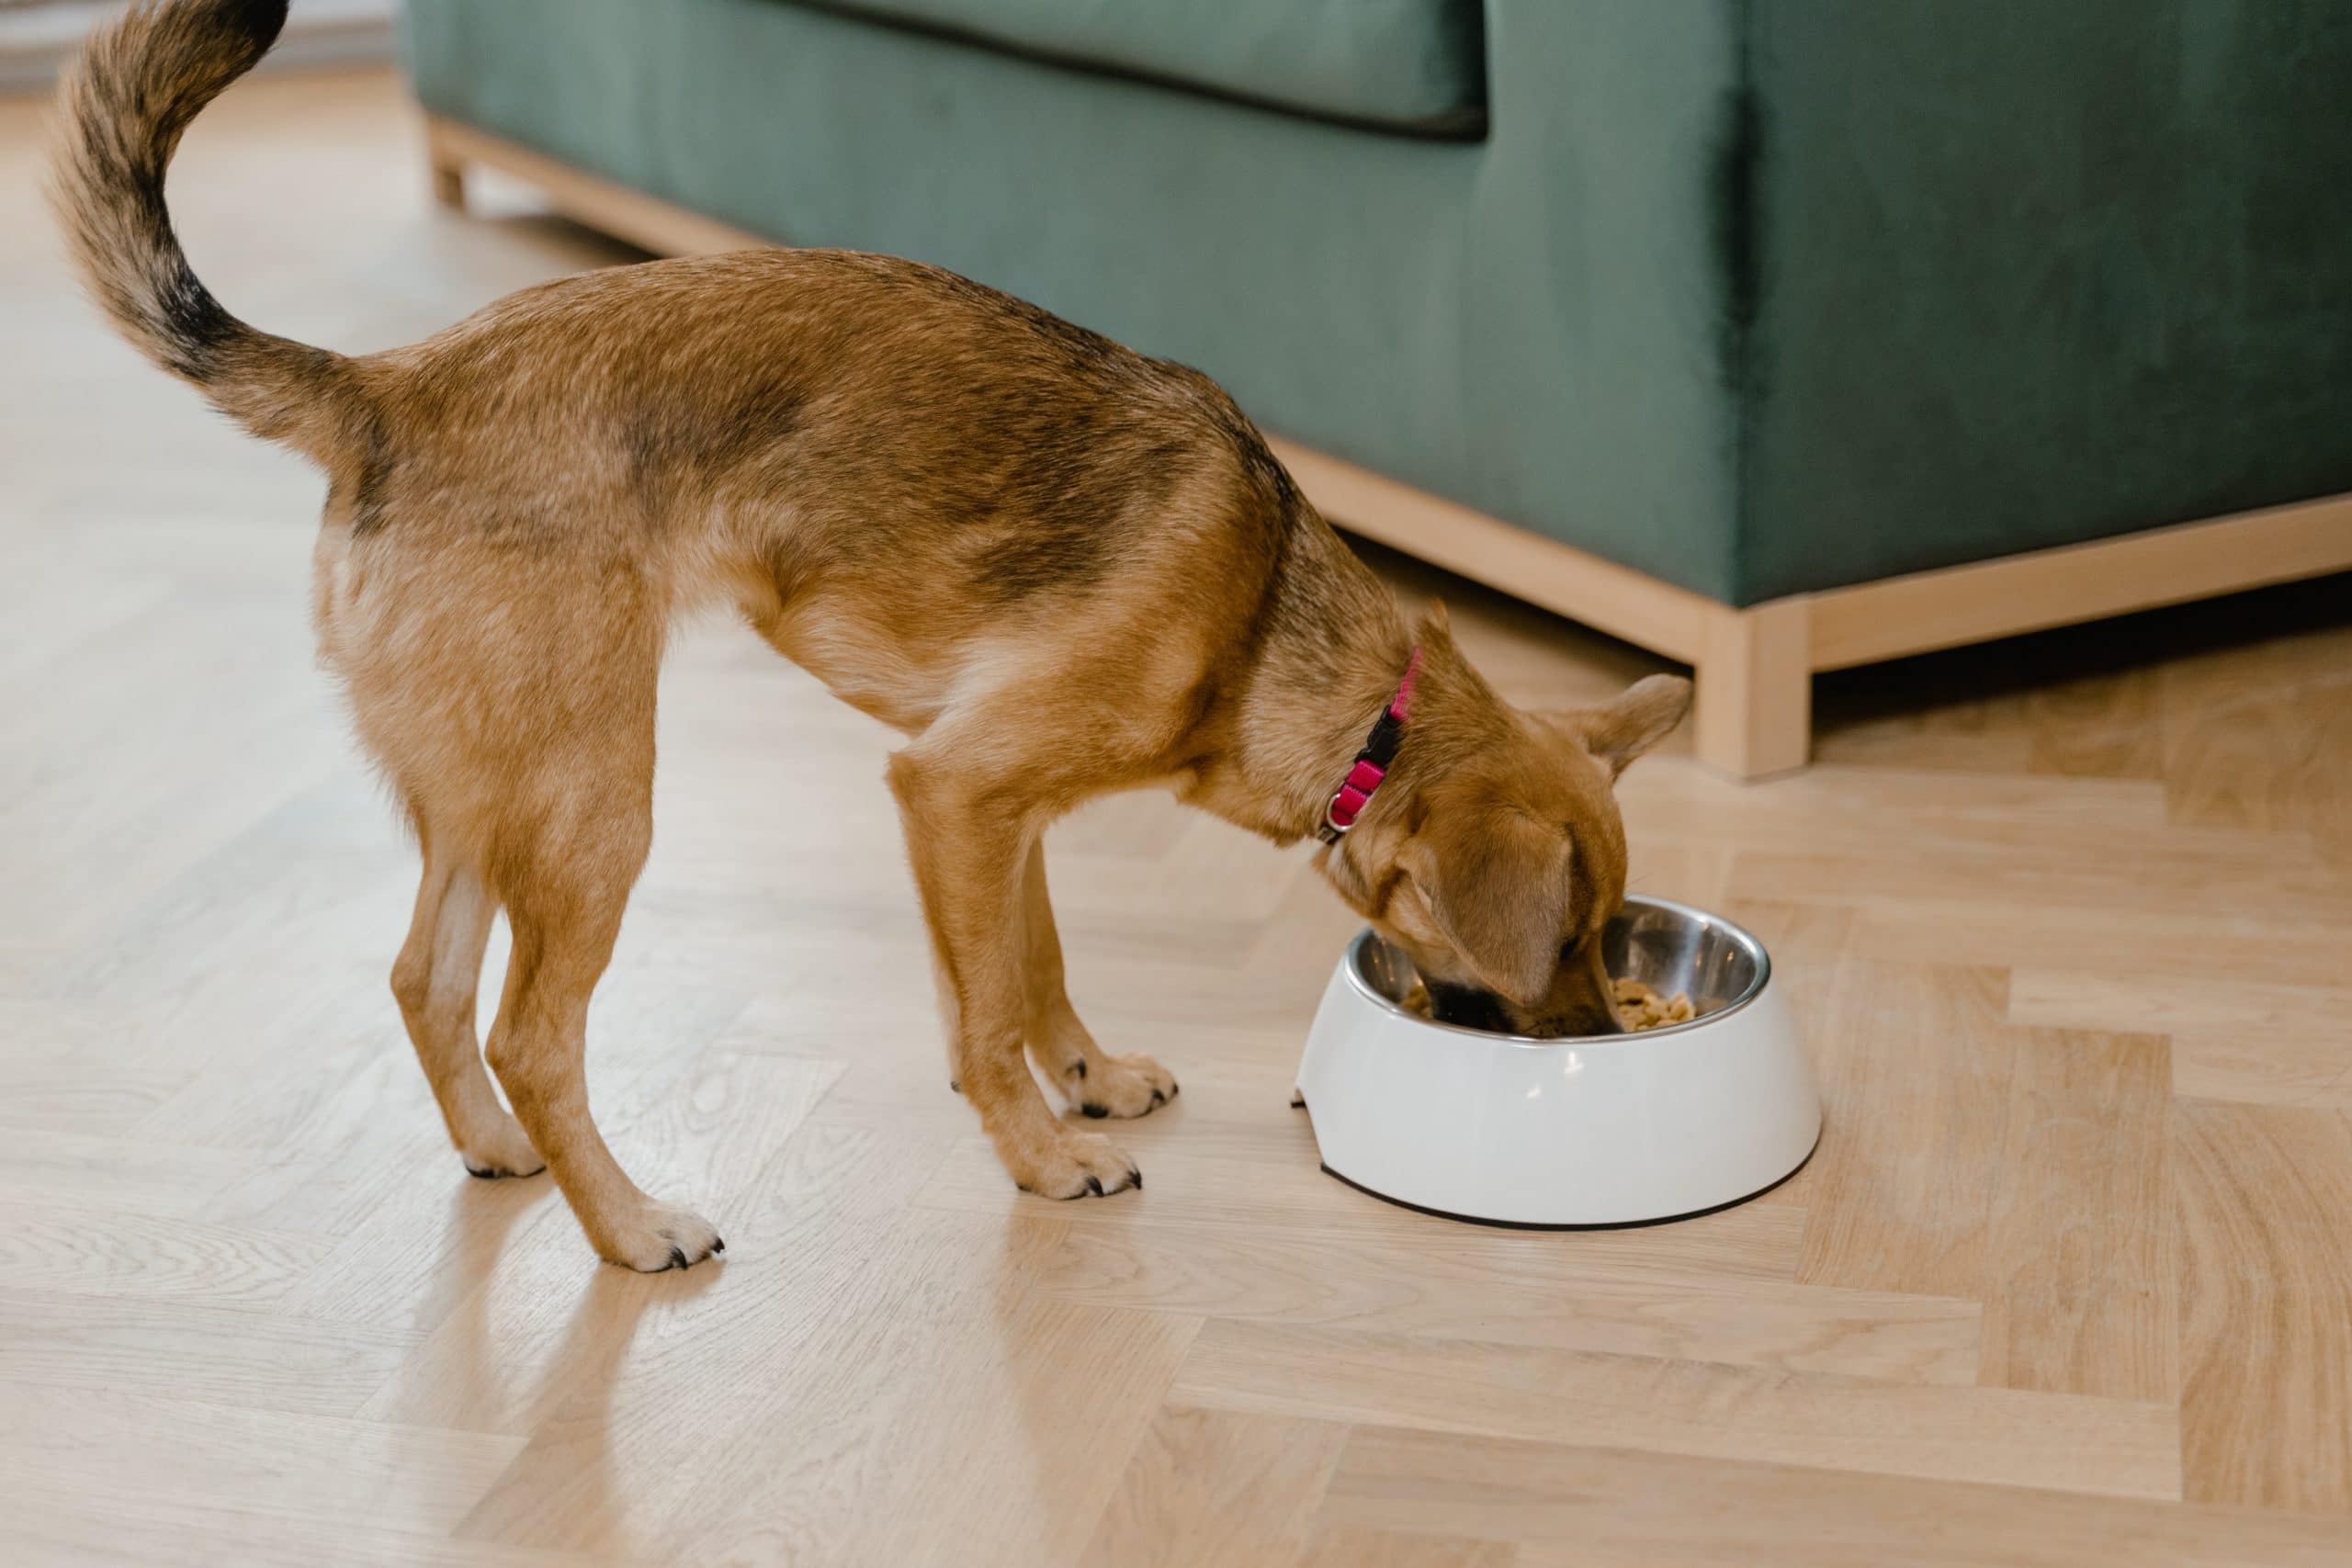 A dog eating from its bowl.